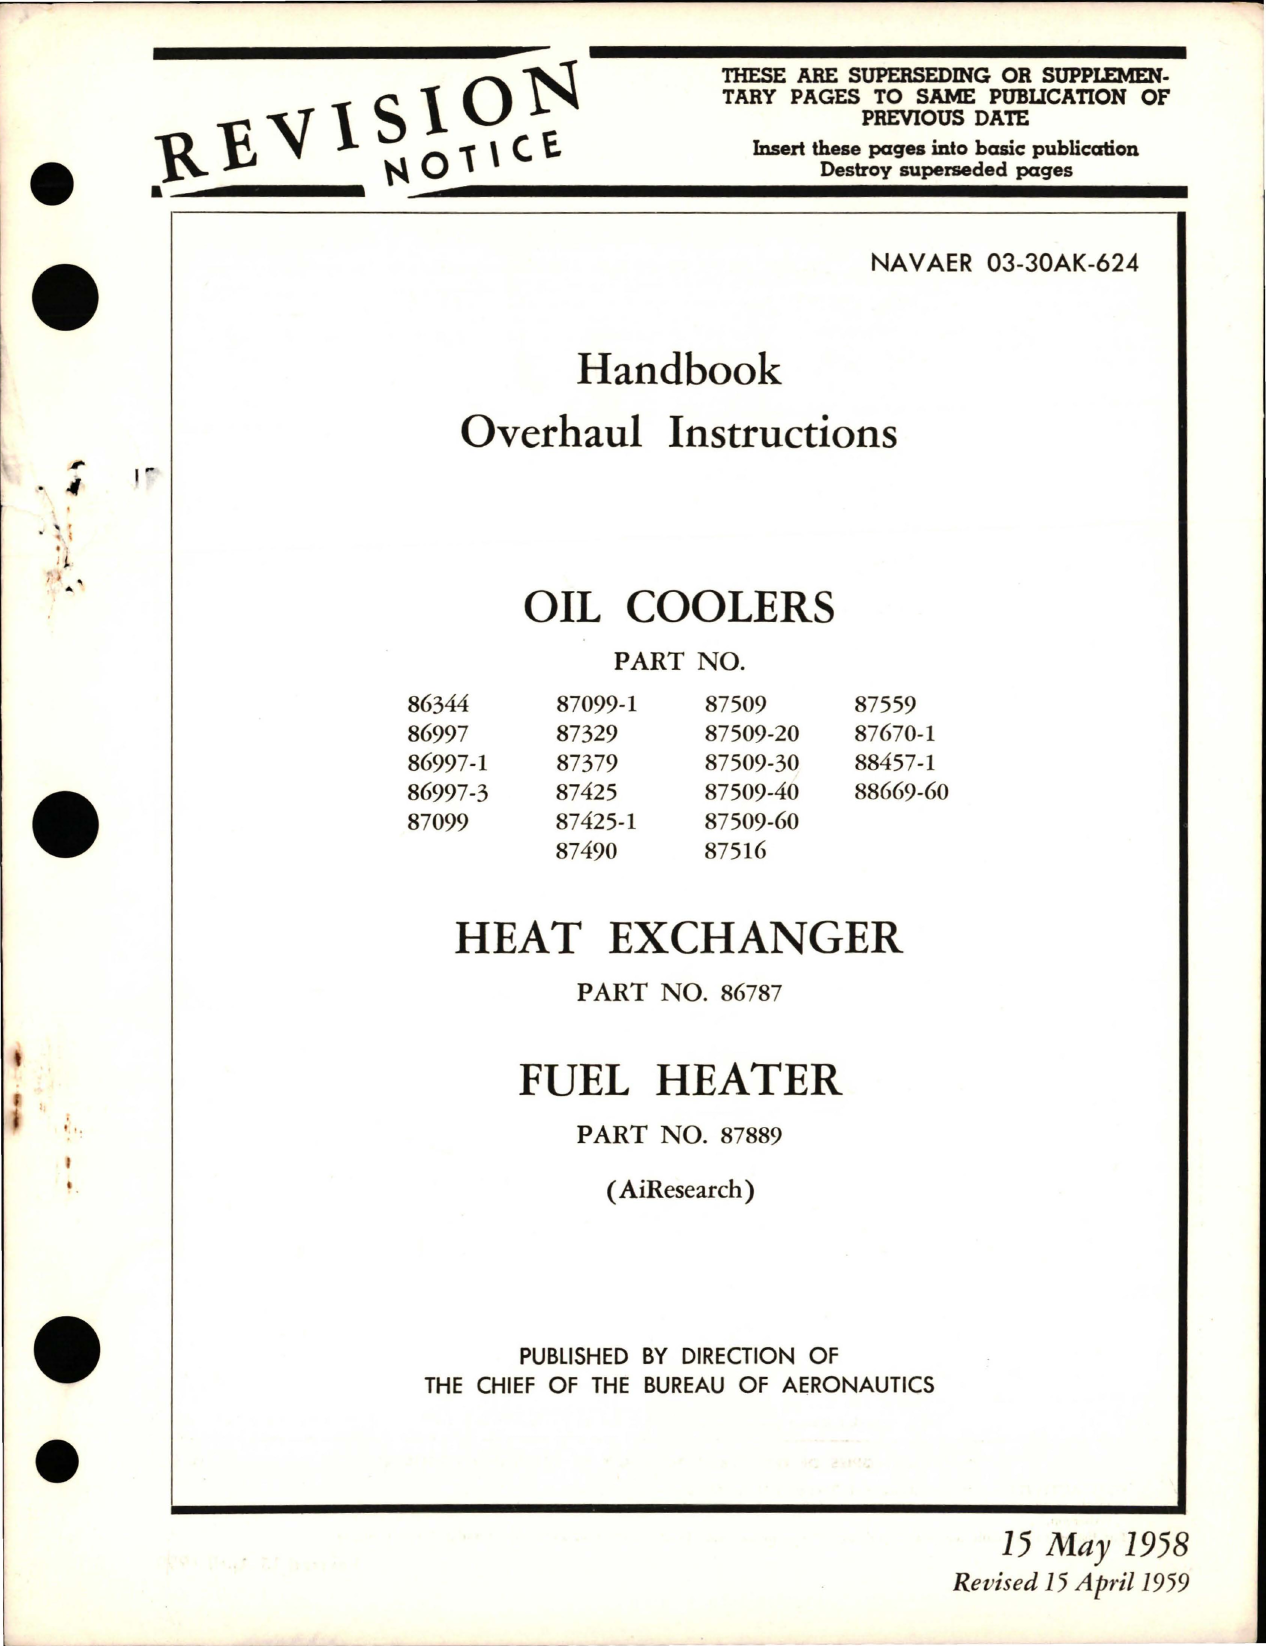 Sample page 1 from AirCorps Library document: Overhaul Instructions for Oil Coolers, Heat Exchanger, and Fuel Heater